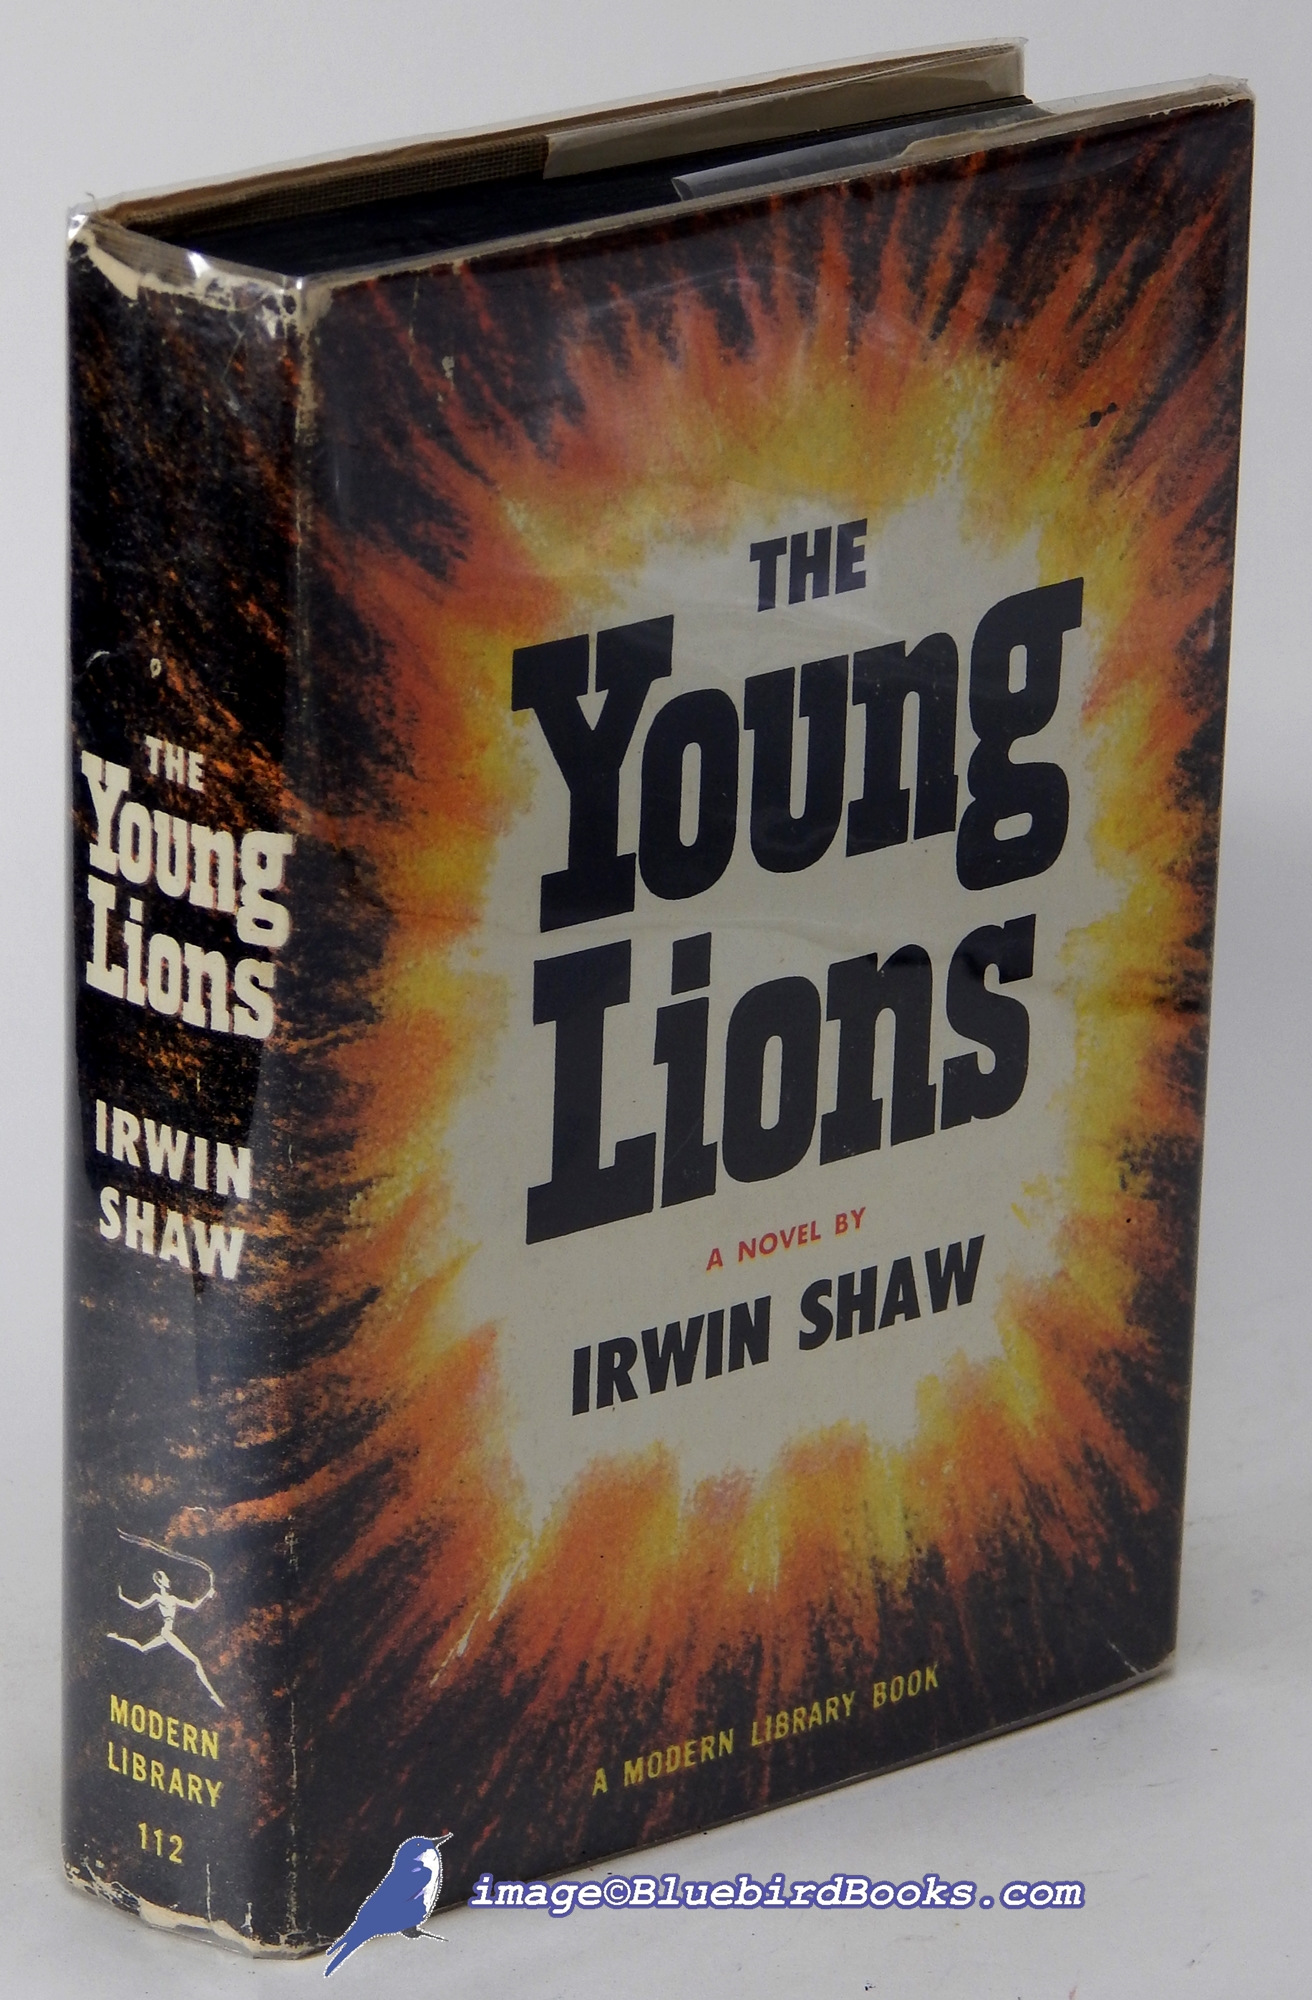 SHAW, IRWIN - The Young Lions (Modern Library #112. 3)